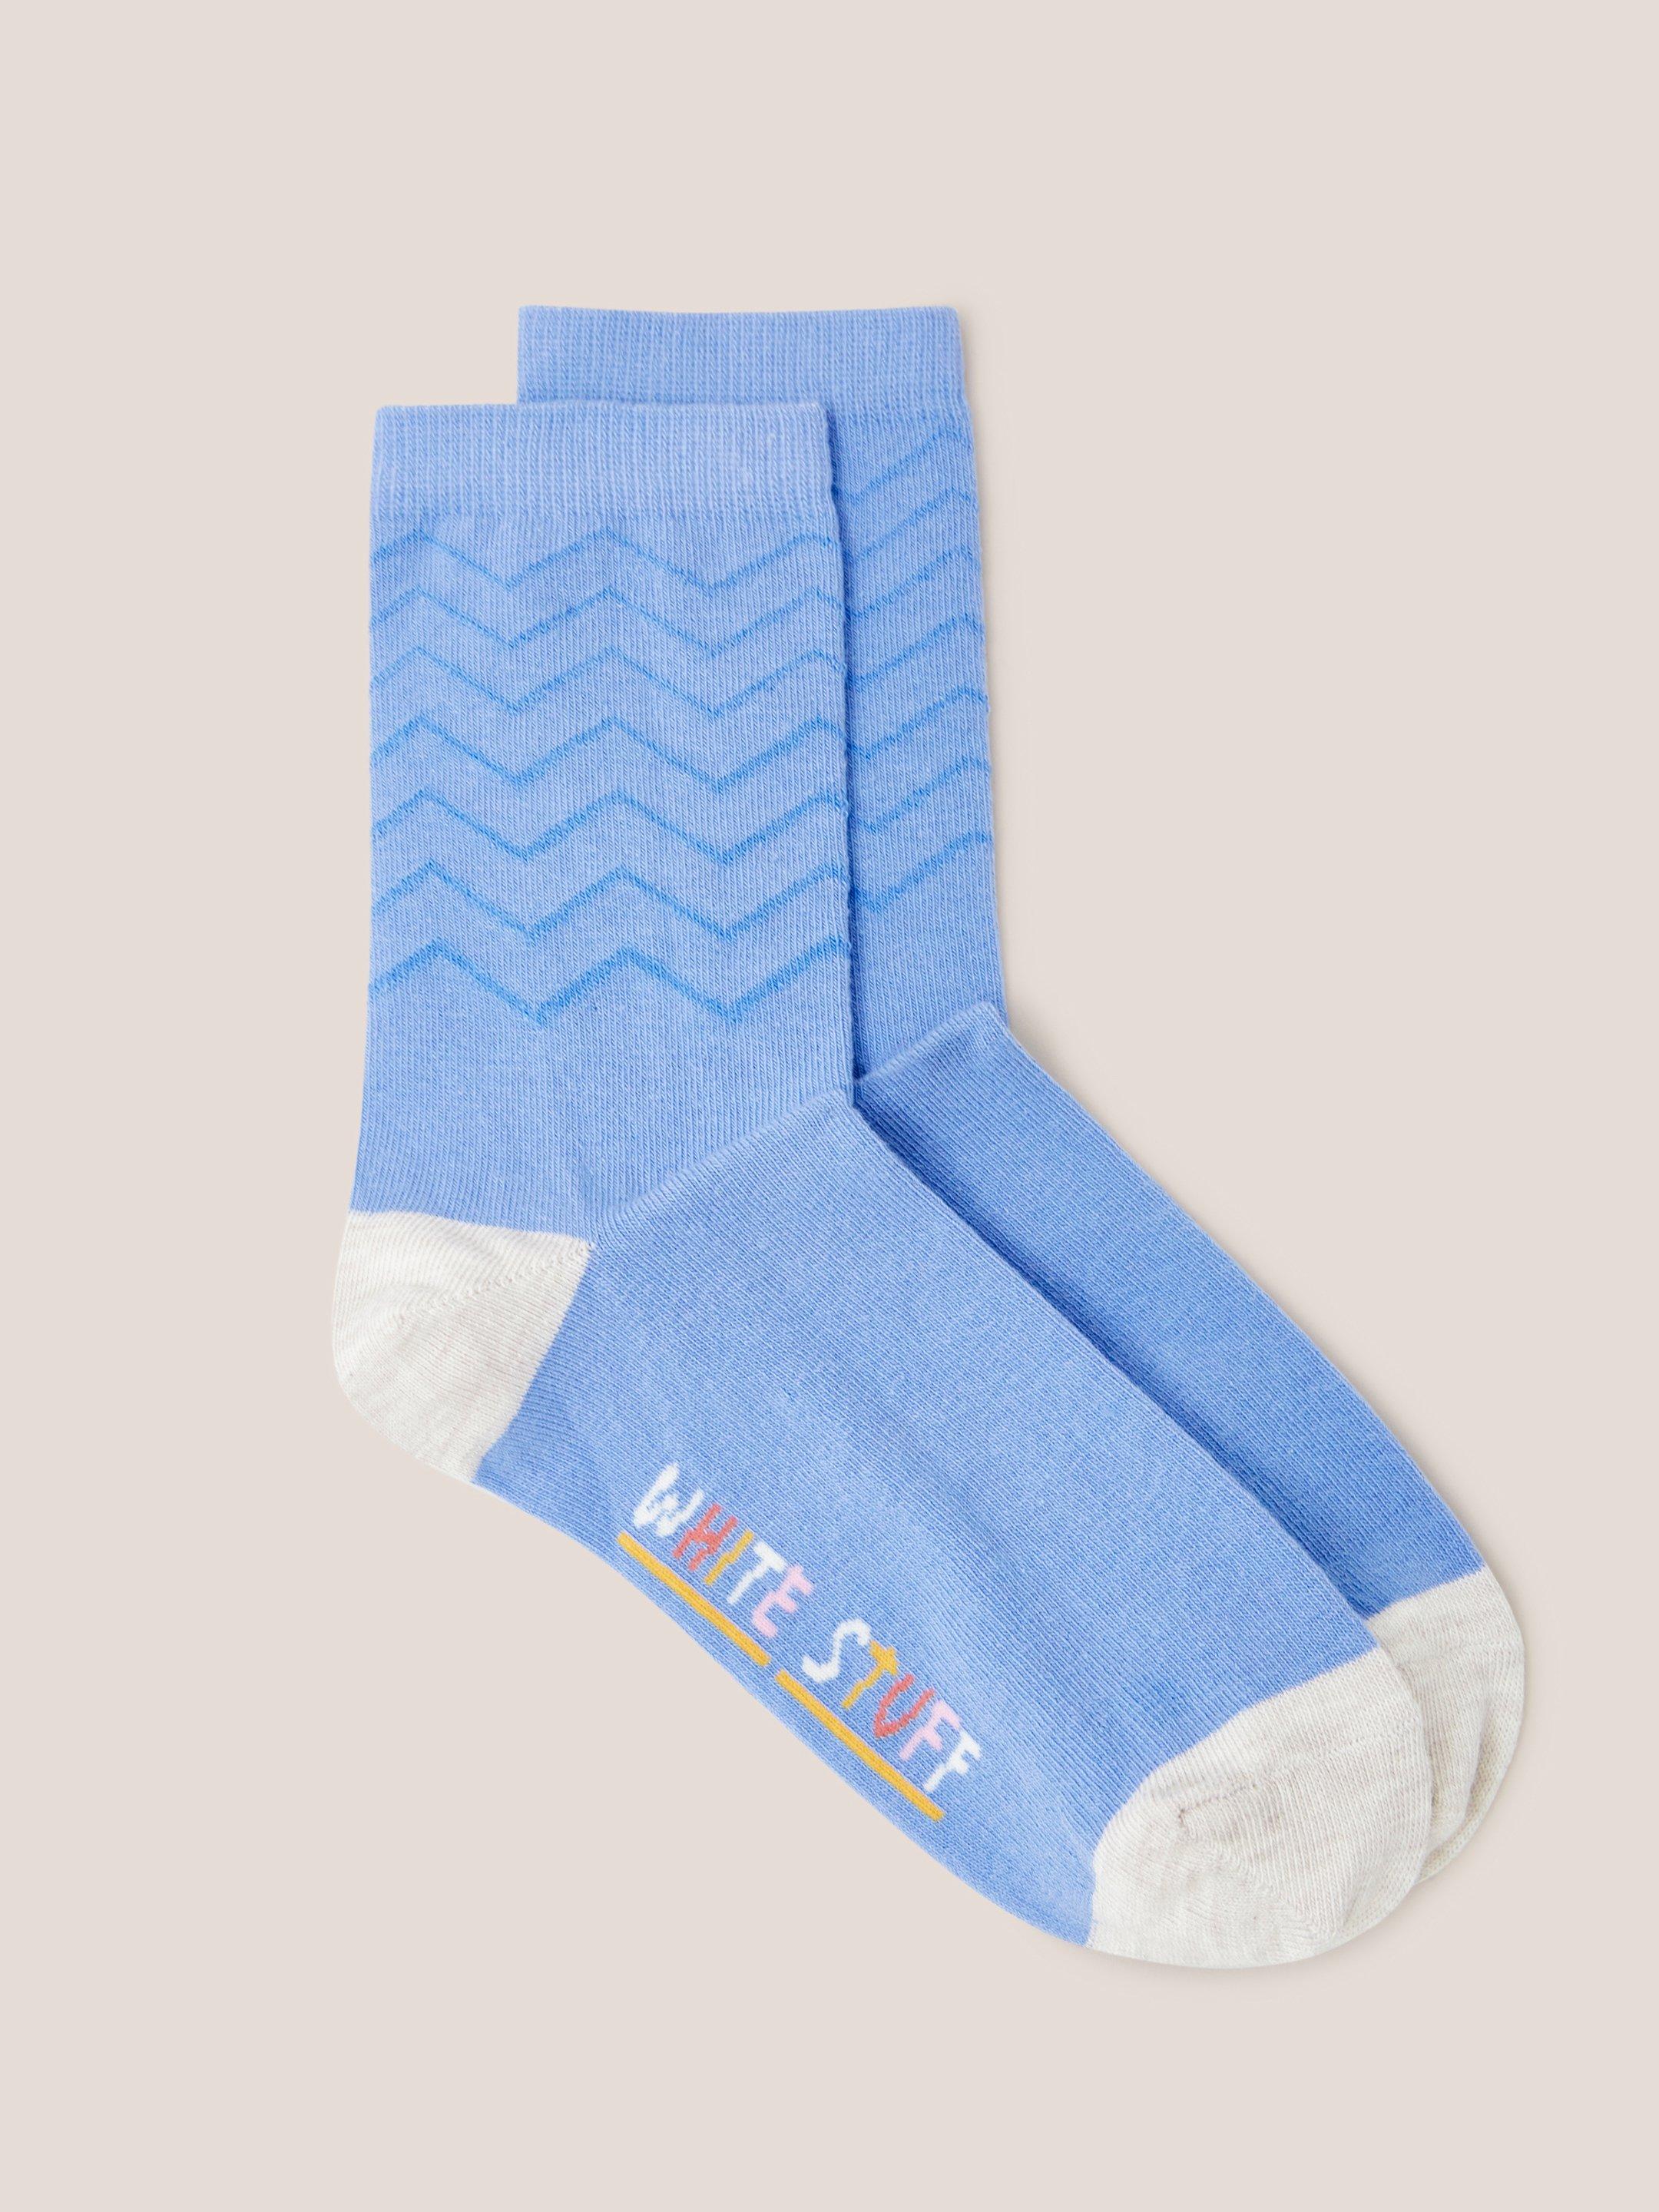 Textured Zigzag Ankle Socks in BLUE MLT - FLAT FRONT